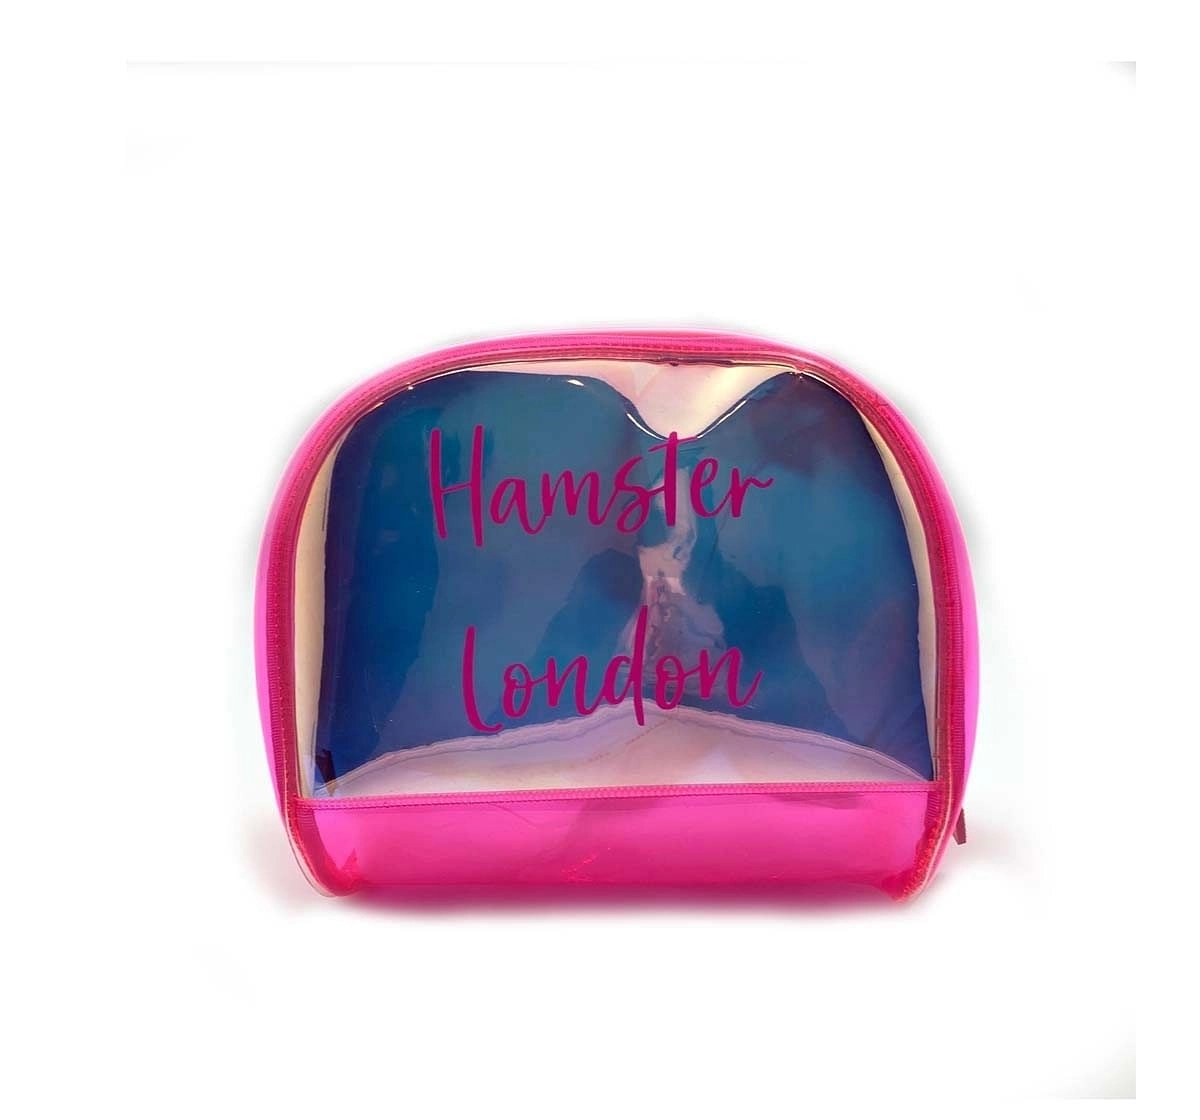 Hamster London Shell Pouch Pink Bags for Age 3Y+ (Pink)